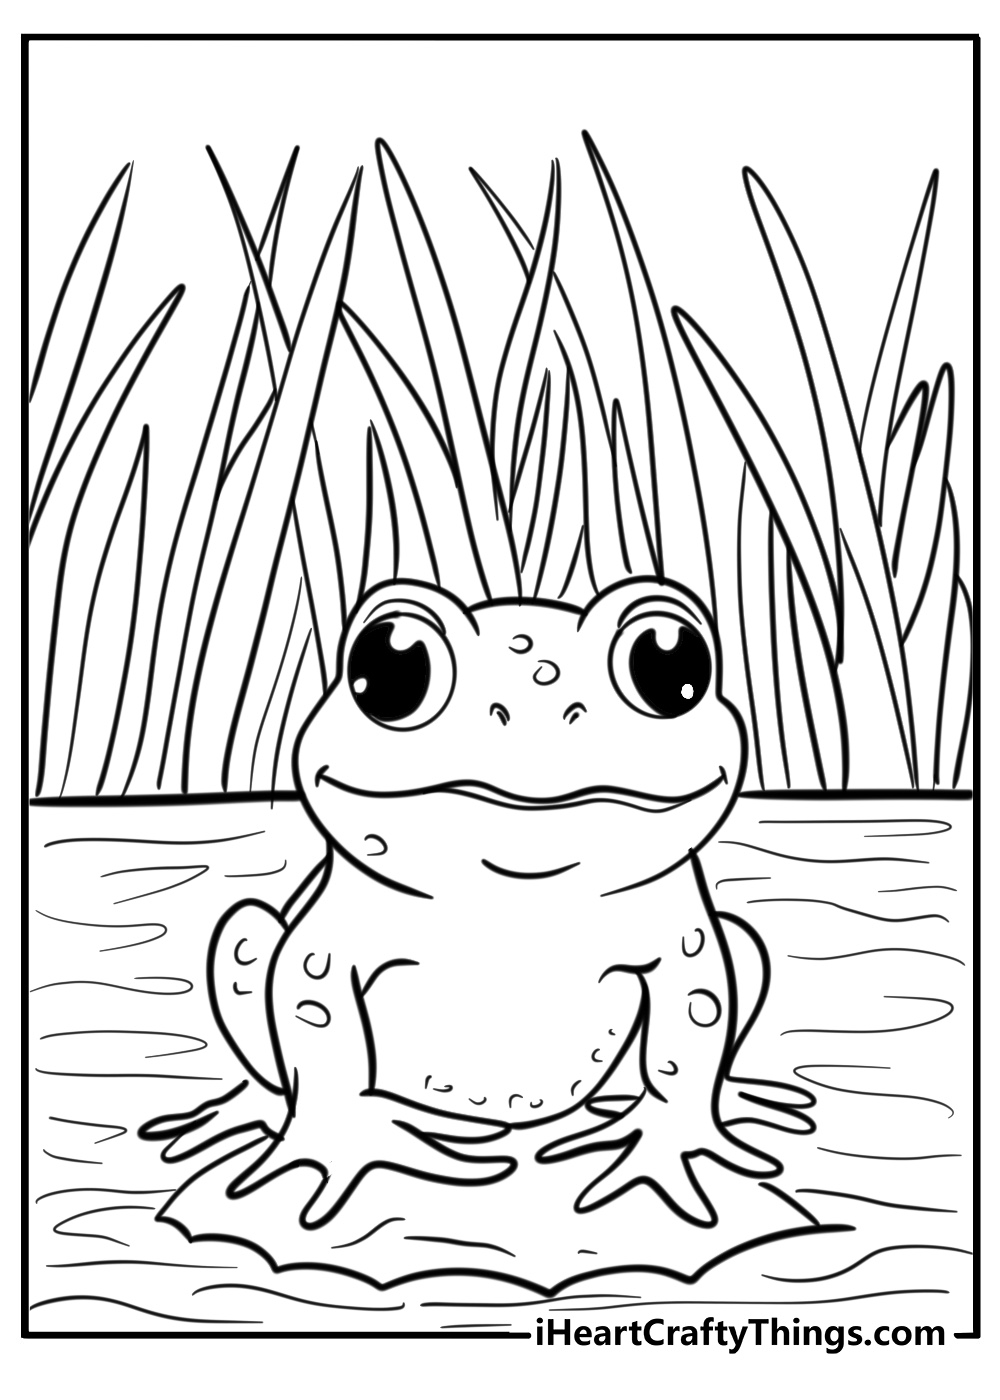 Frogs coloring pages